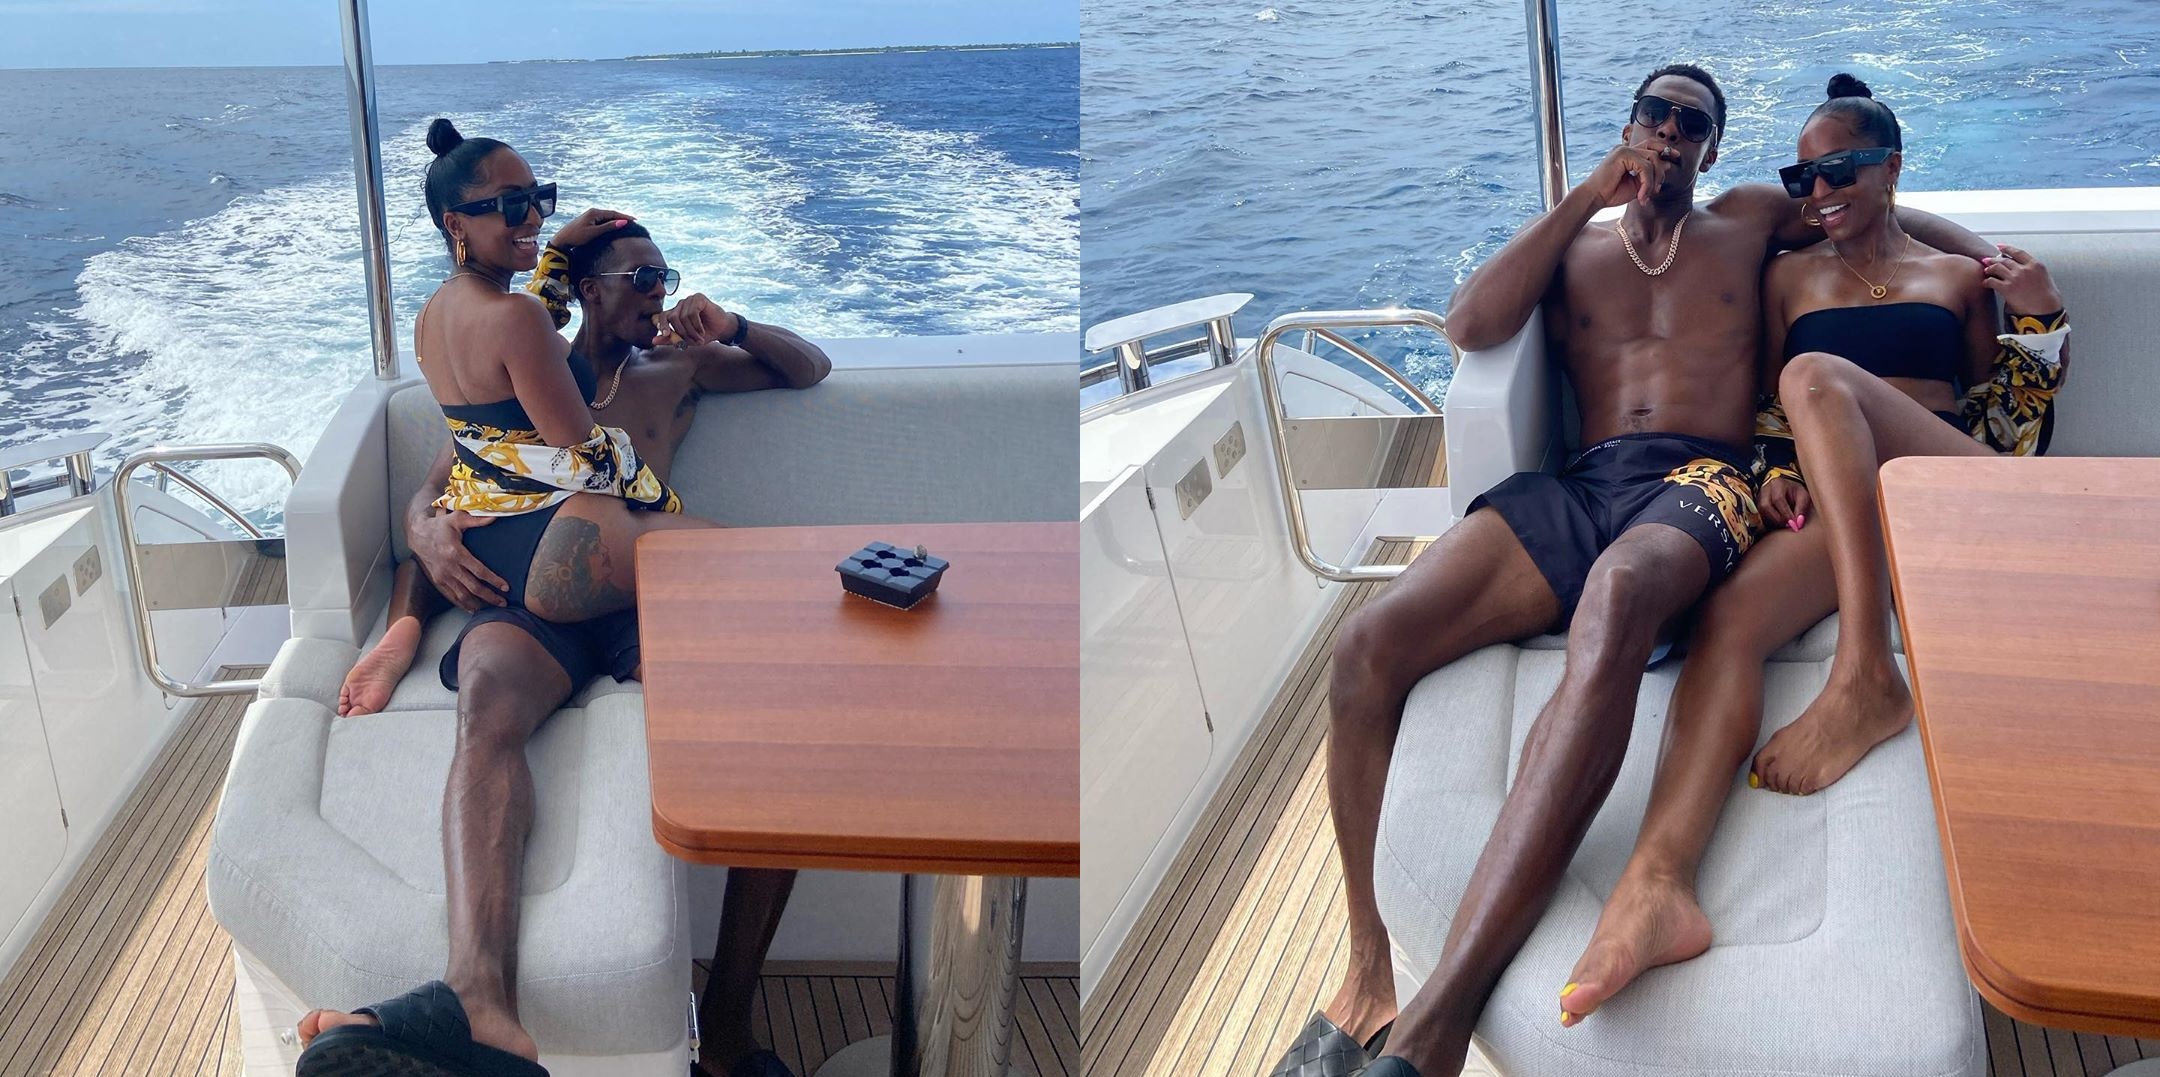 Rajon Rondo won his second NBA championship, earlier this month, with the Lakers. After the title, the Lakers returned to Los Angeles, for their championship celebration. Now, his girlfriend, Latoia Fitzgerald, have gone on a vacation, where they are steaming it up.